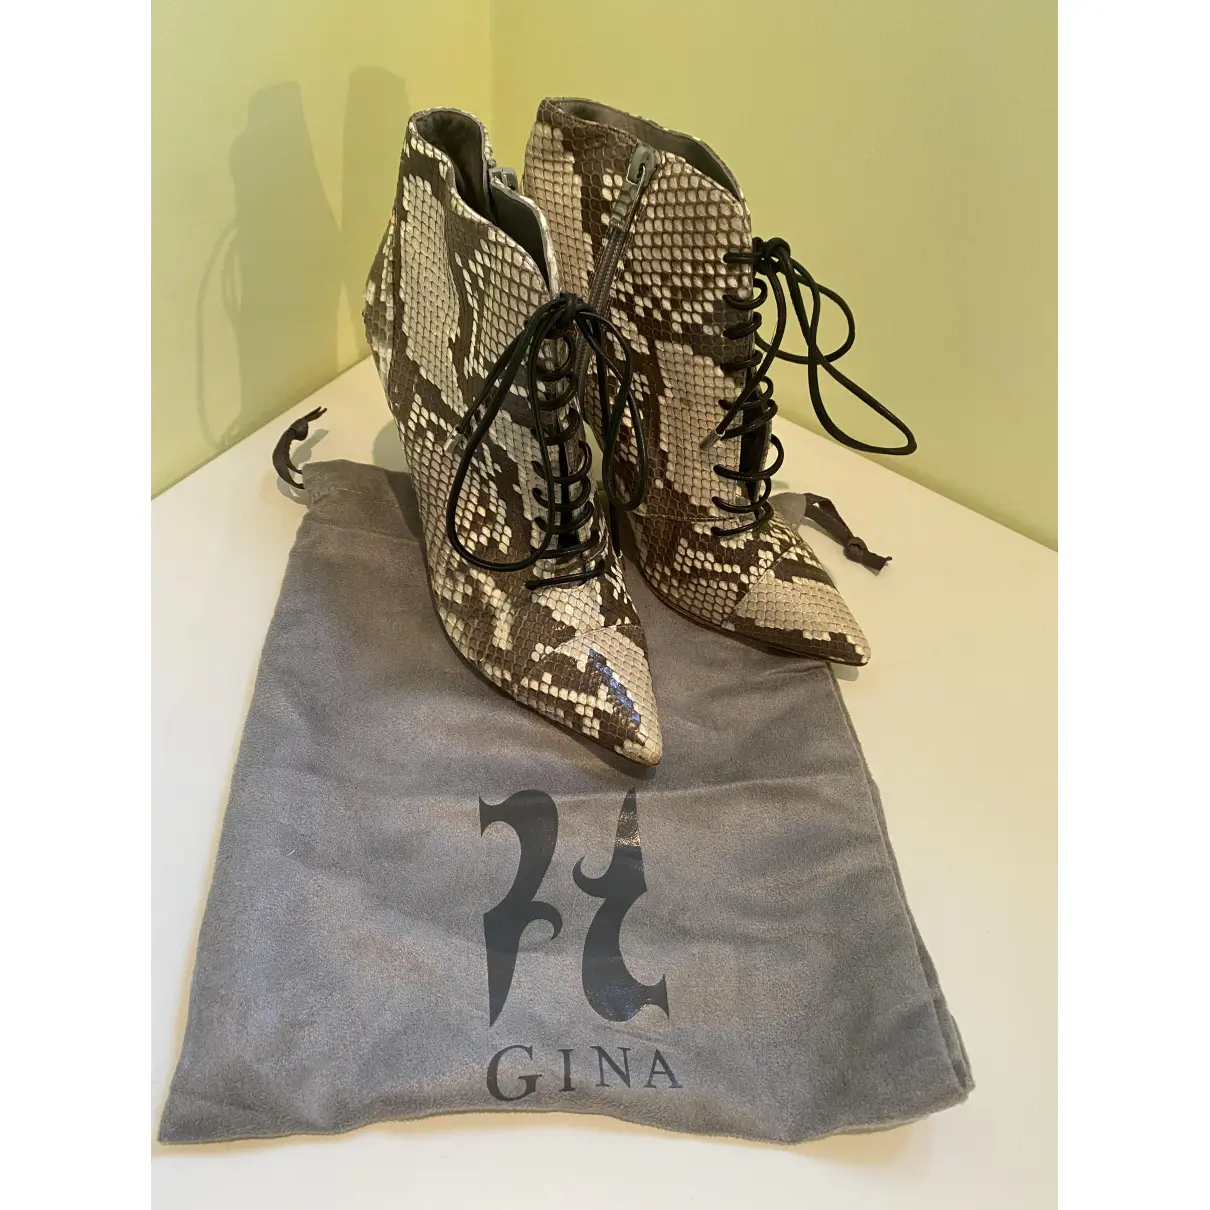 Buy Gina Ankle boots online